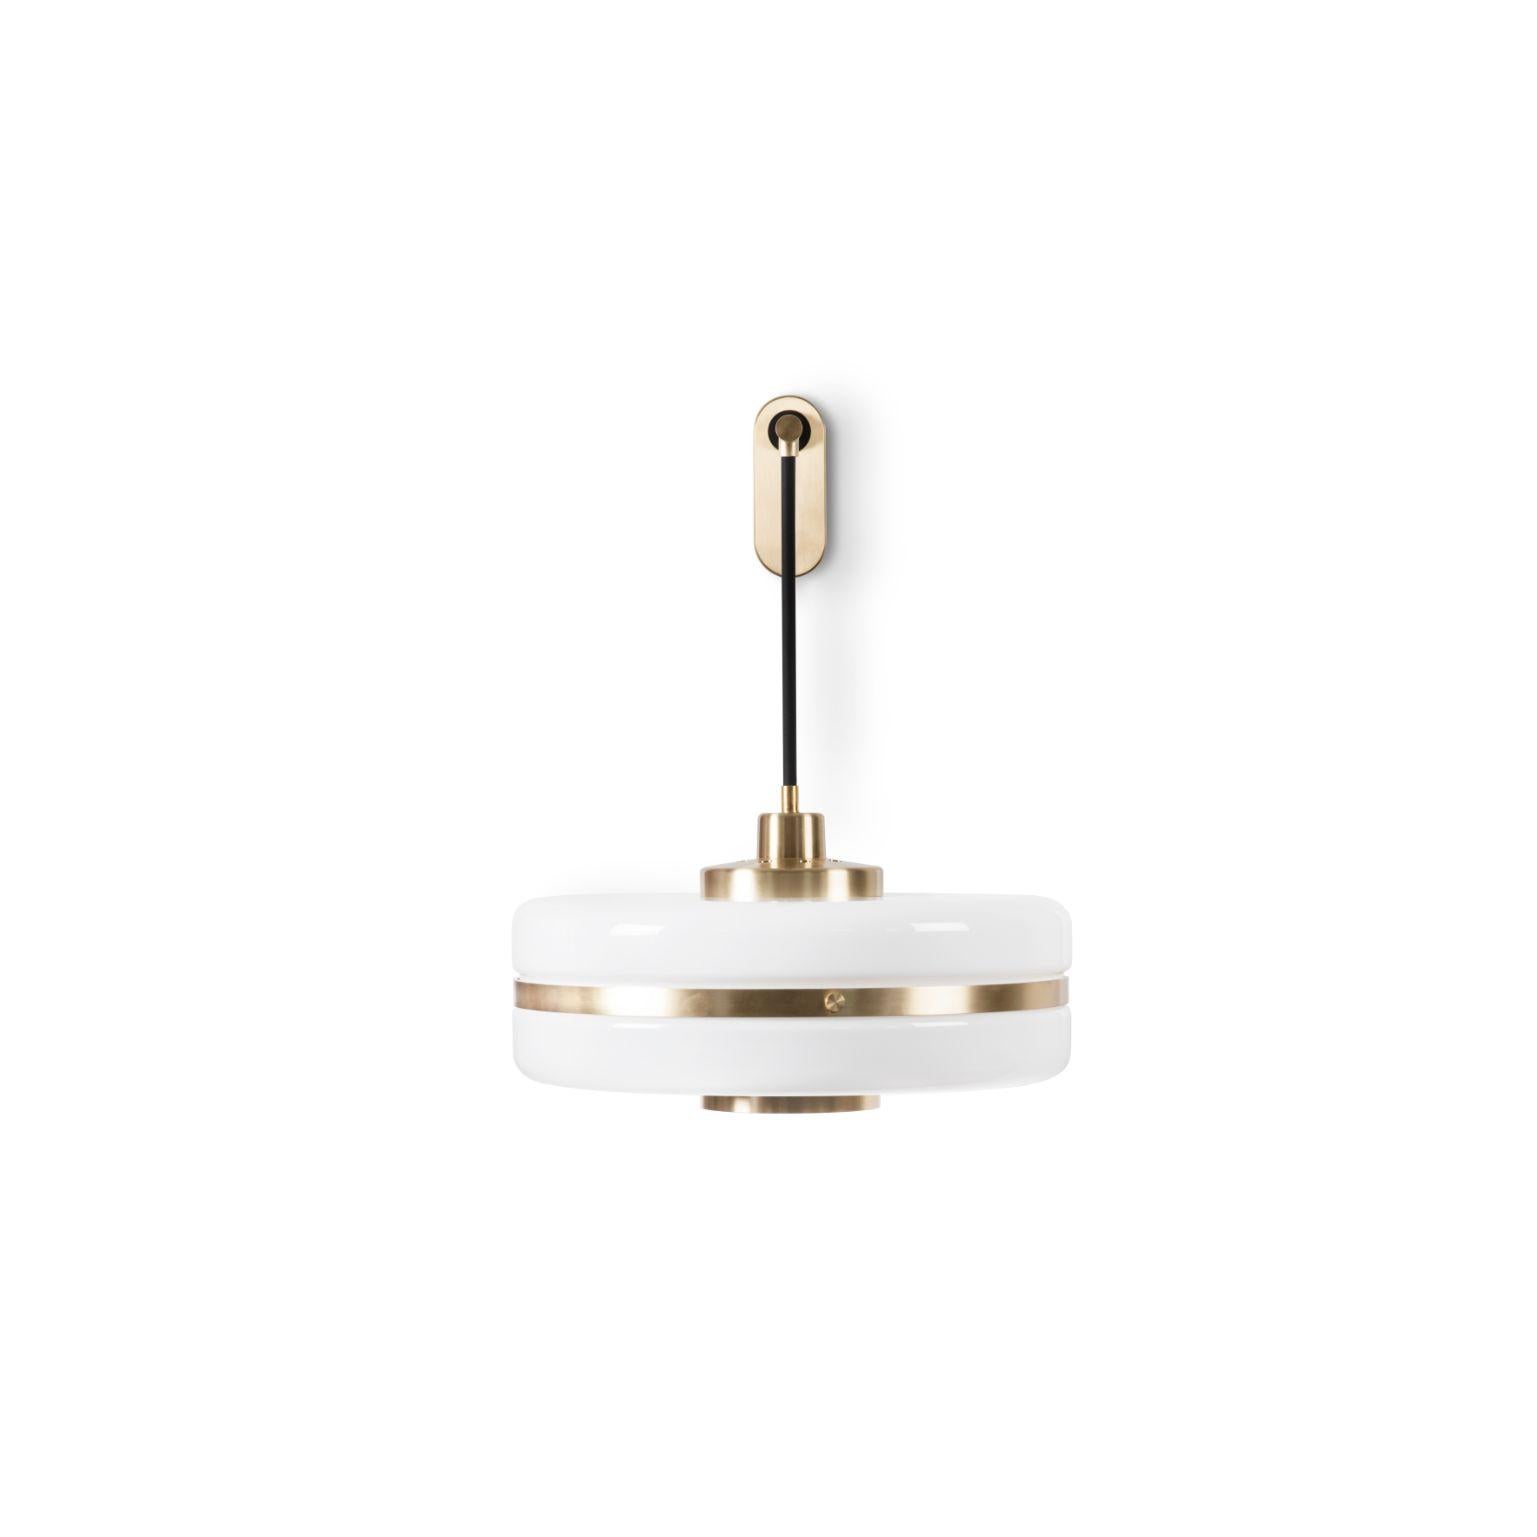 Masina wall light by Bert Frank
Dimensions: 53.5 x 56.4 x 40 cm
Materials: Brass, glass

When Adam Yeats and Robbie Llewellyn founded Bert Frank in 2013 it was a meeting of minds and the start of a collaborative creative partnership with